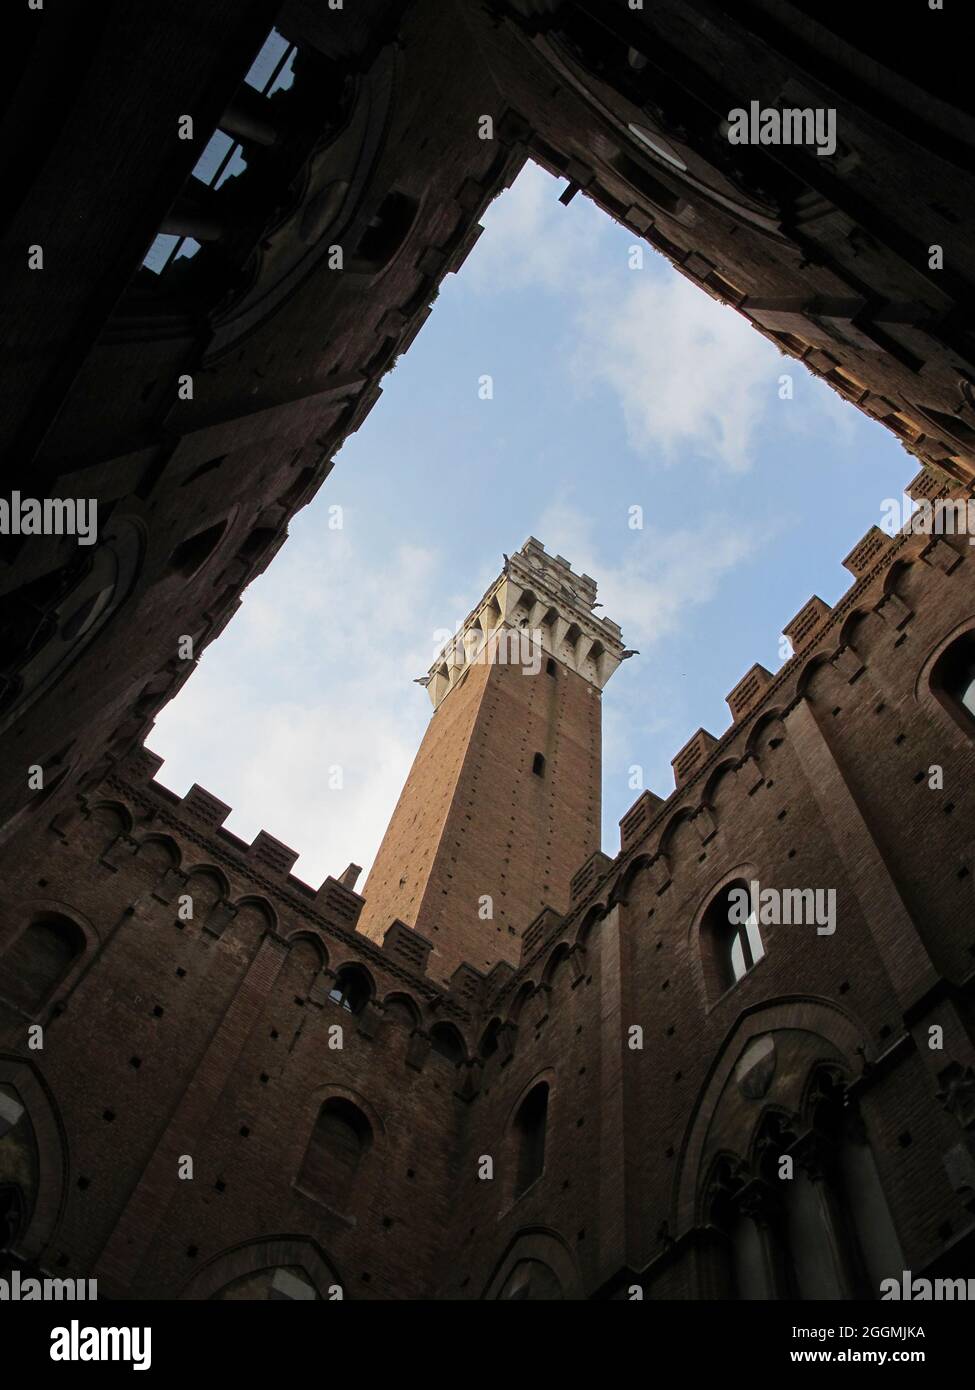 The historic Torre del Mangia of Siena, Italy - completed in 1348 - is shown from the courtyard of Palazzo Pubblico (Town Hall) during the day. Stock Photo